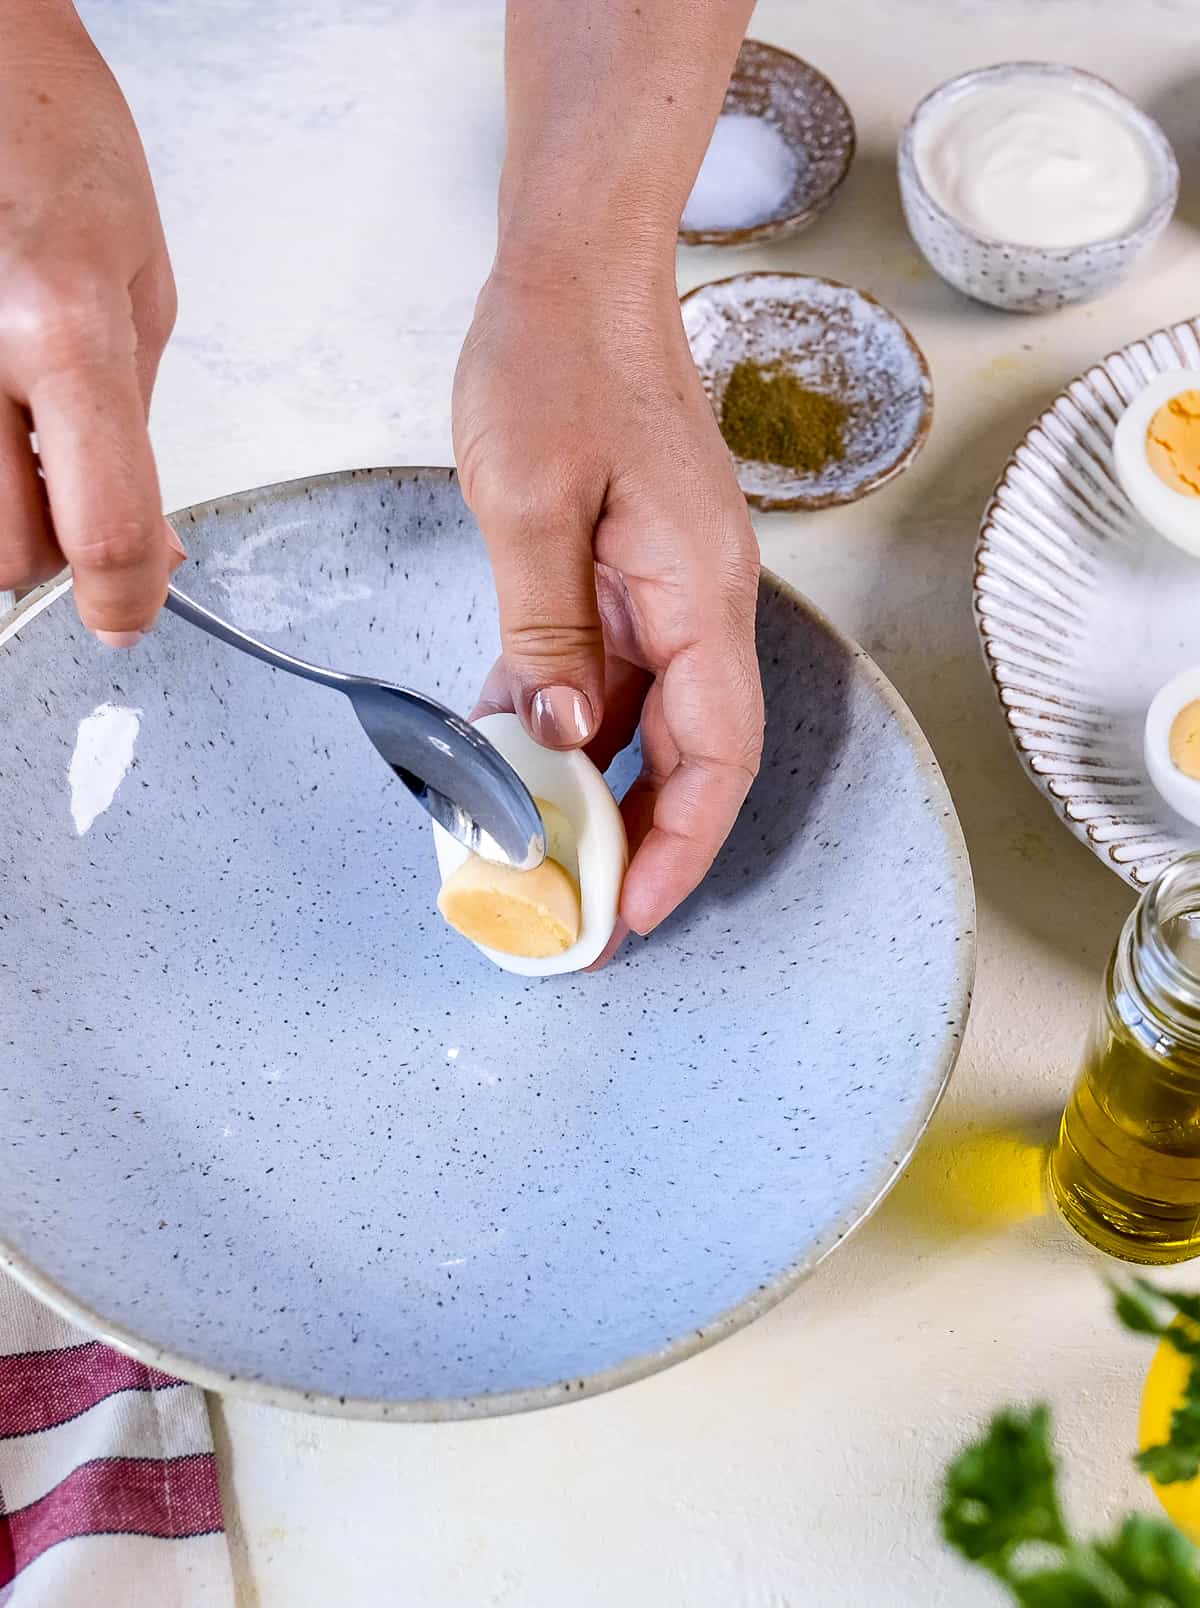 Hands removing a cooked yolk from egg white with a spoon.